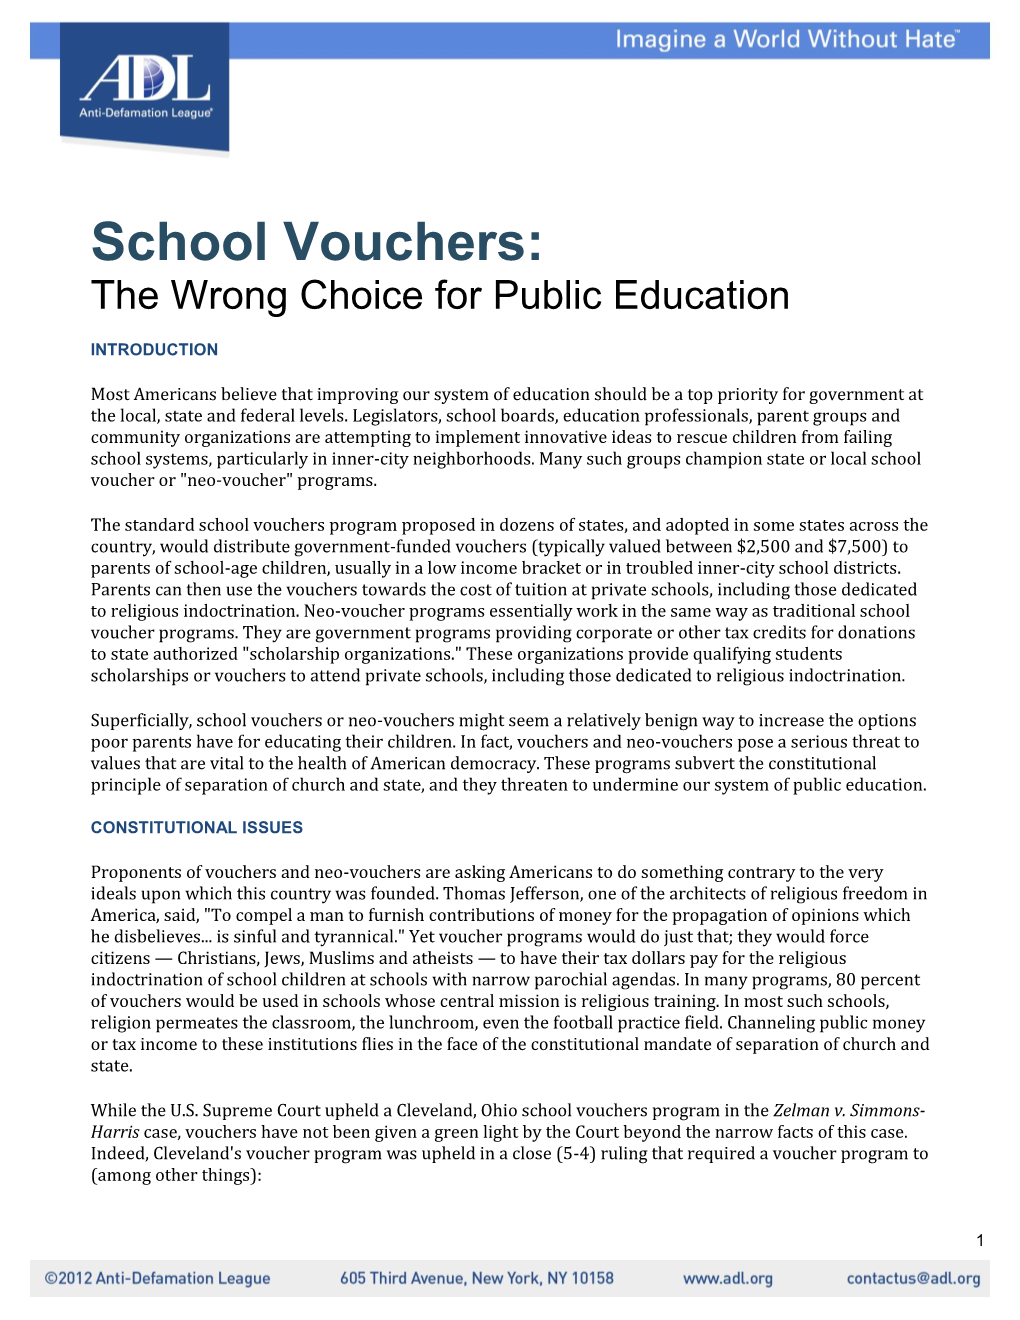 School Vouchers: the Wrong Choice for Public Education